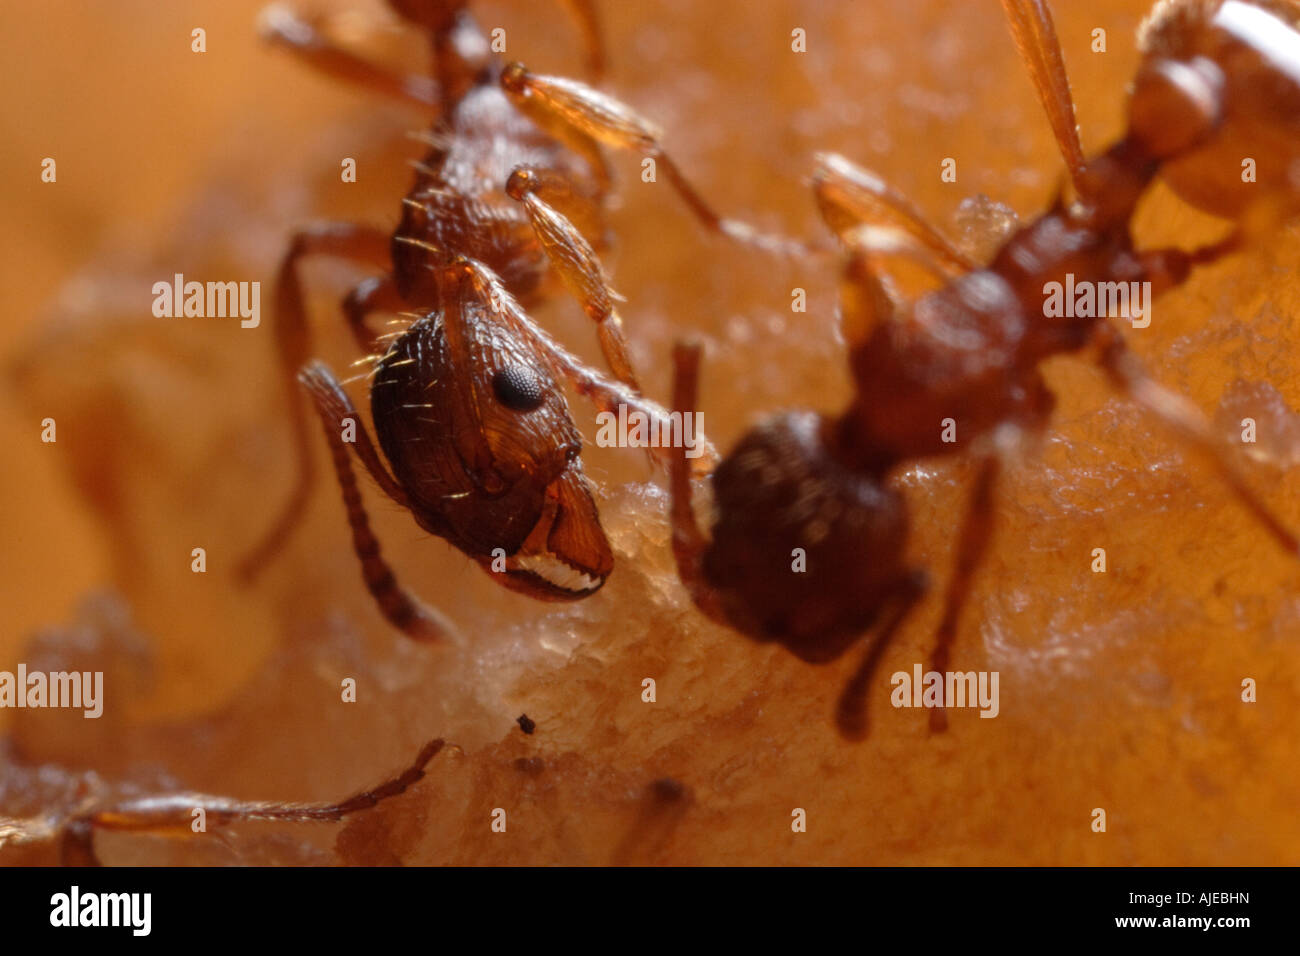 Two Myrmica ants eating pear Stock Photo